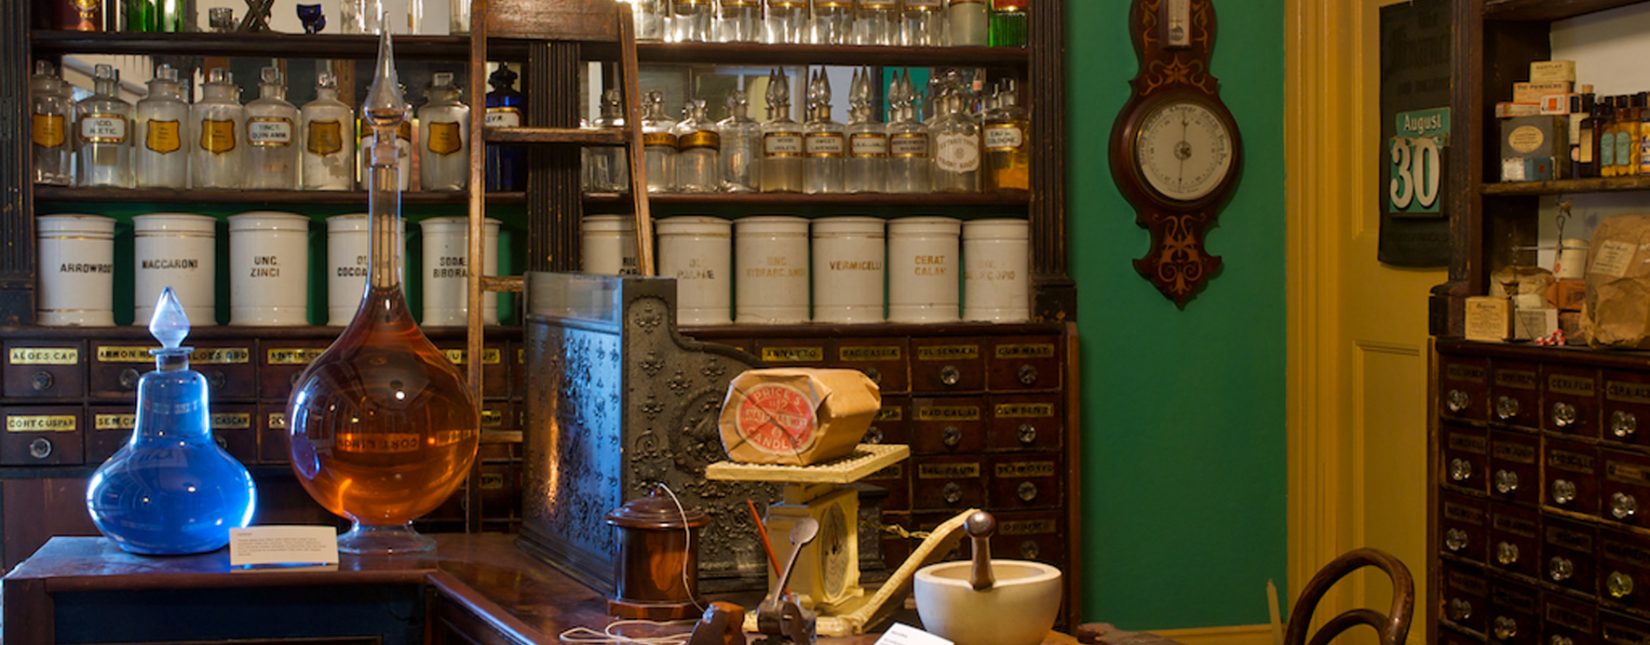 The chemist shop in the Museum of Lakeland Life and Industry Kendal